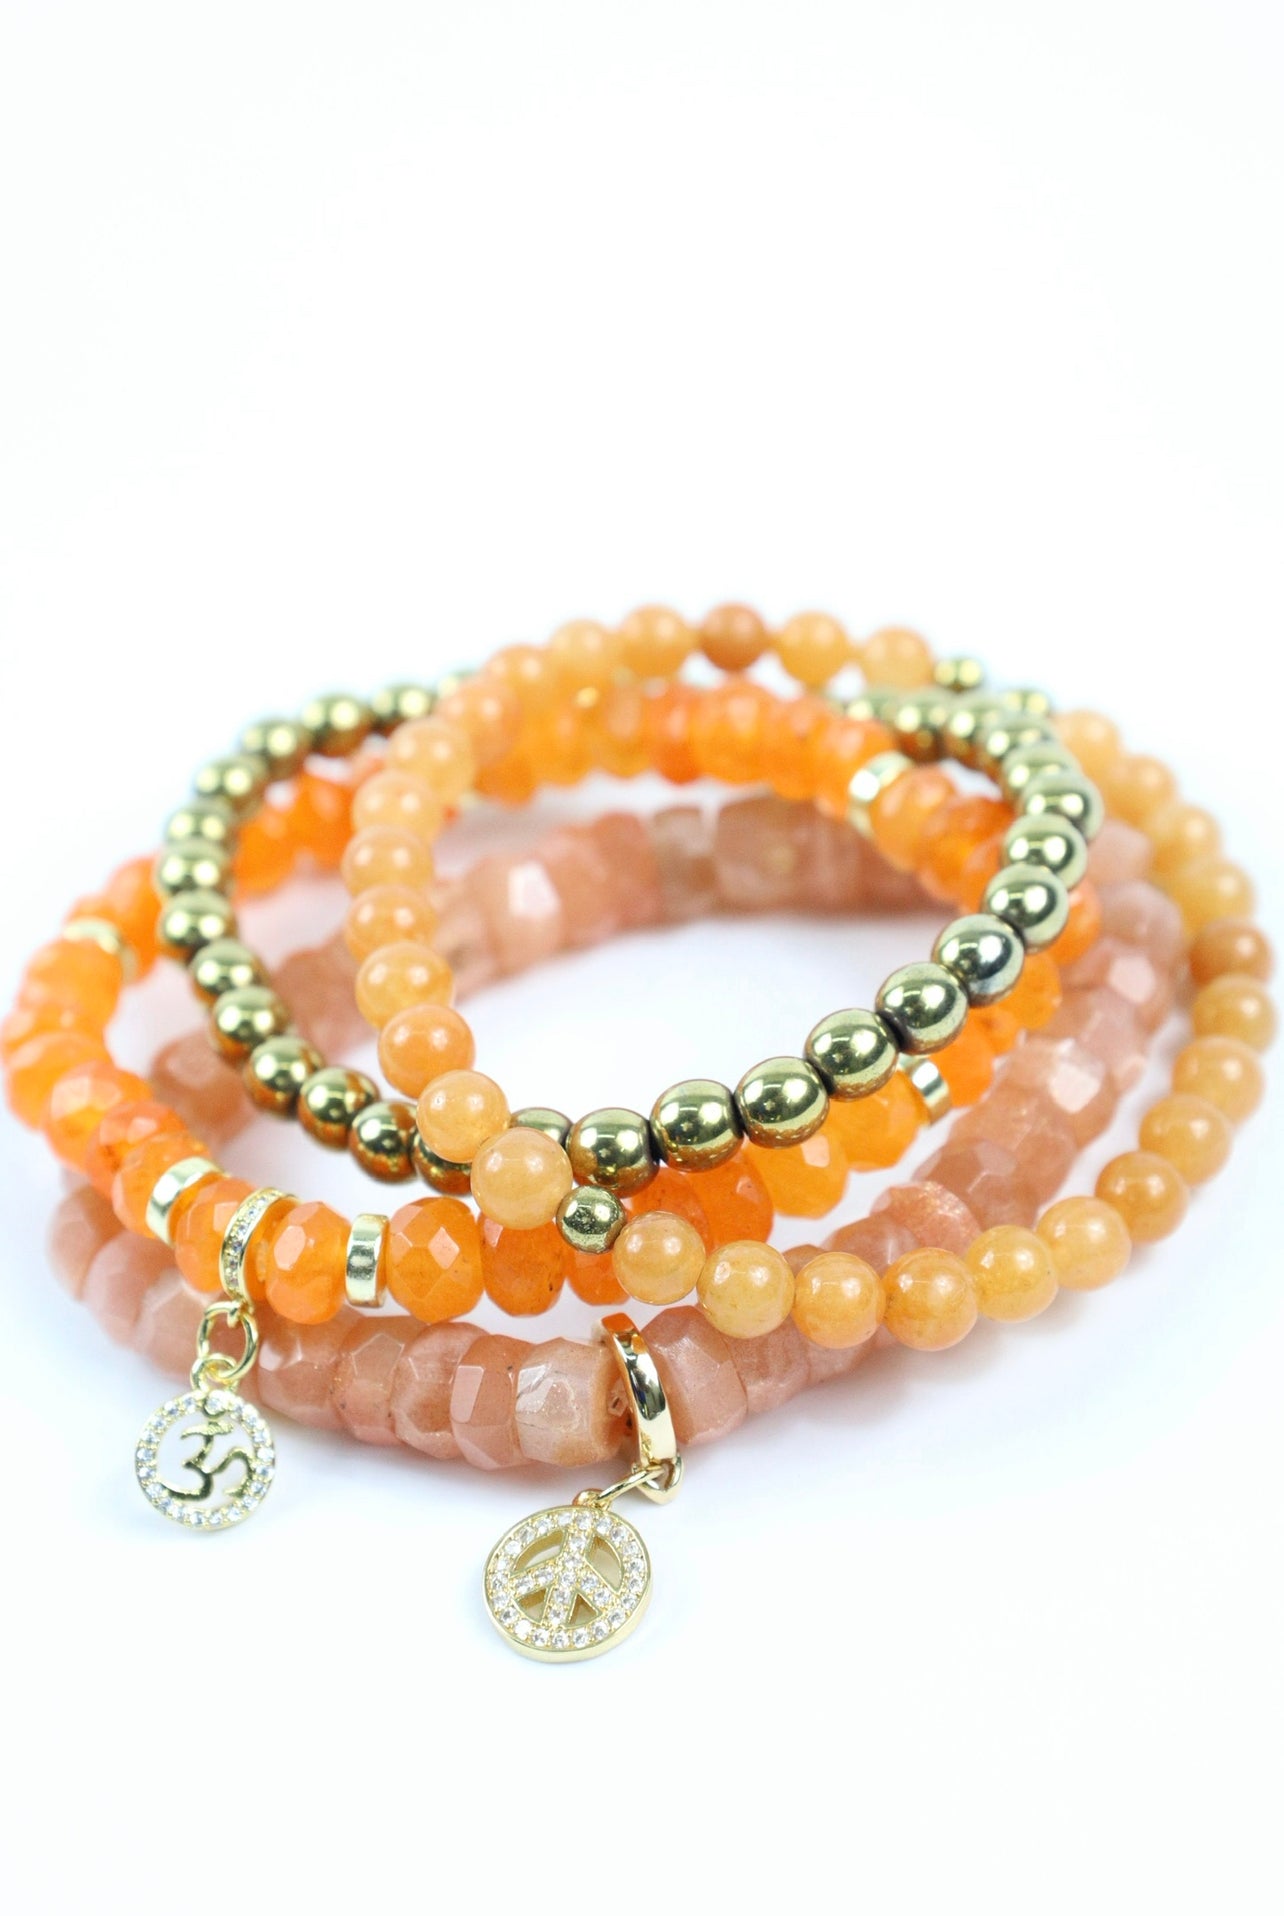 Peace and Blessings Bracelet Set